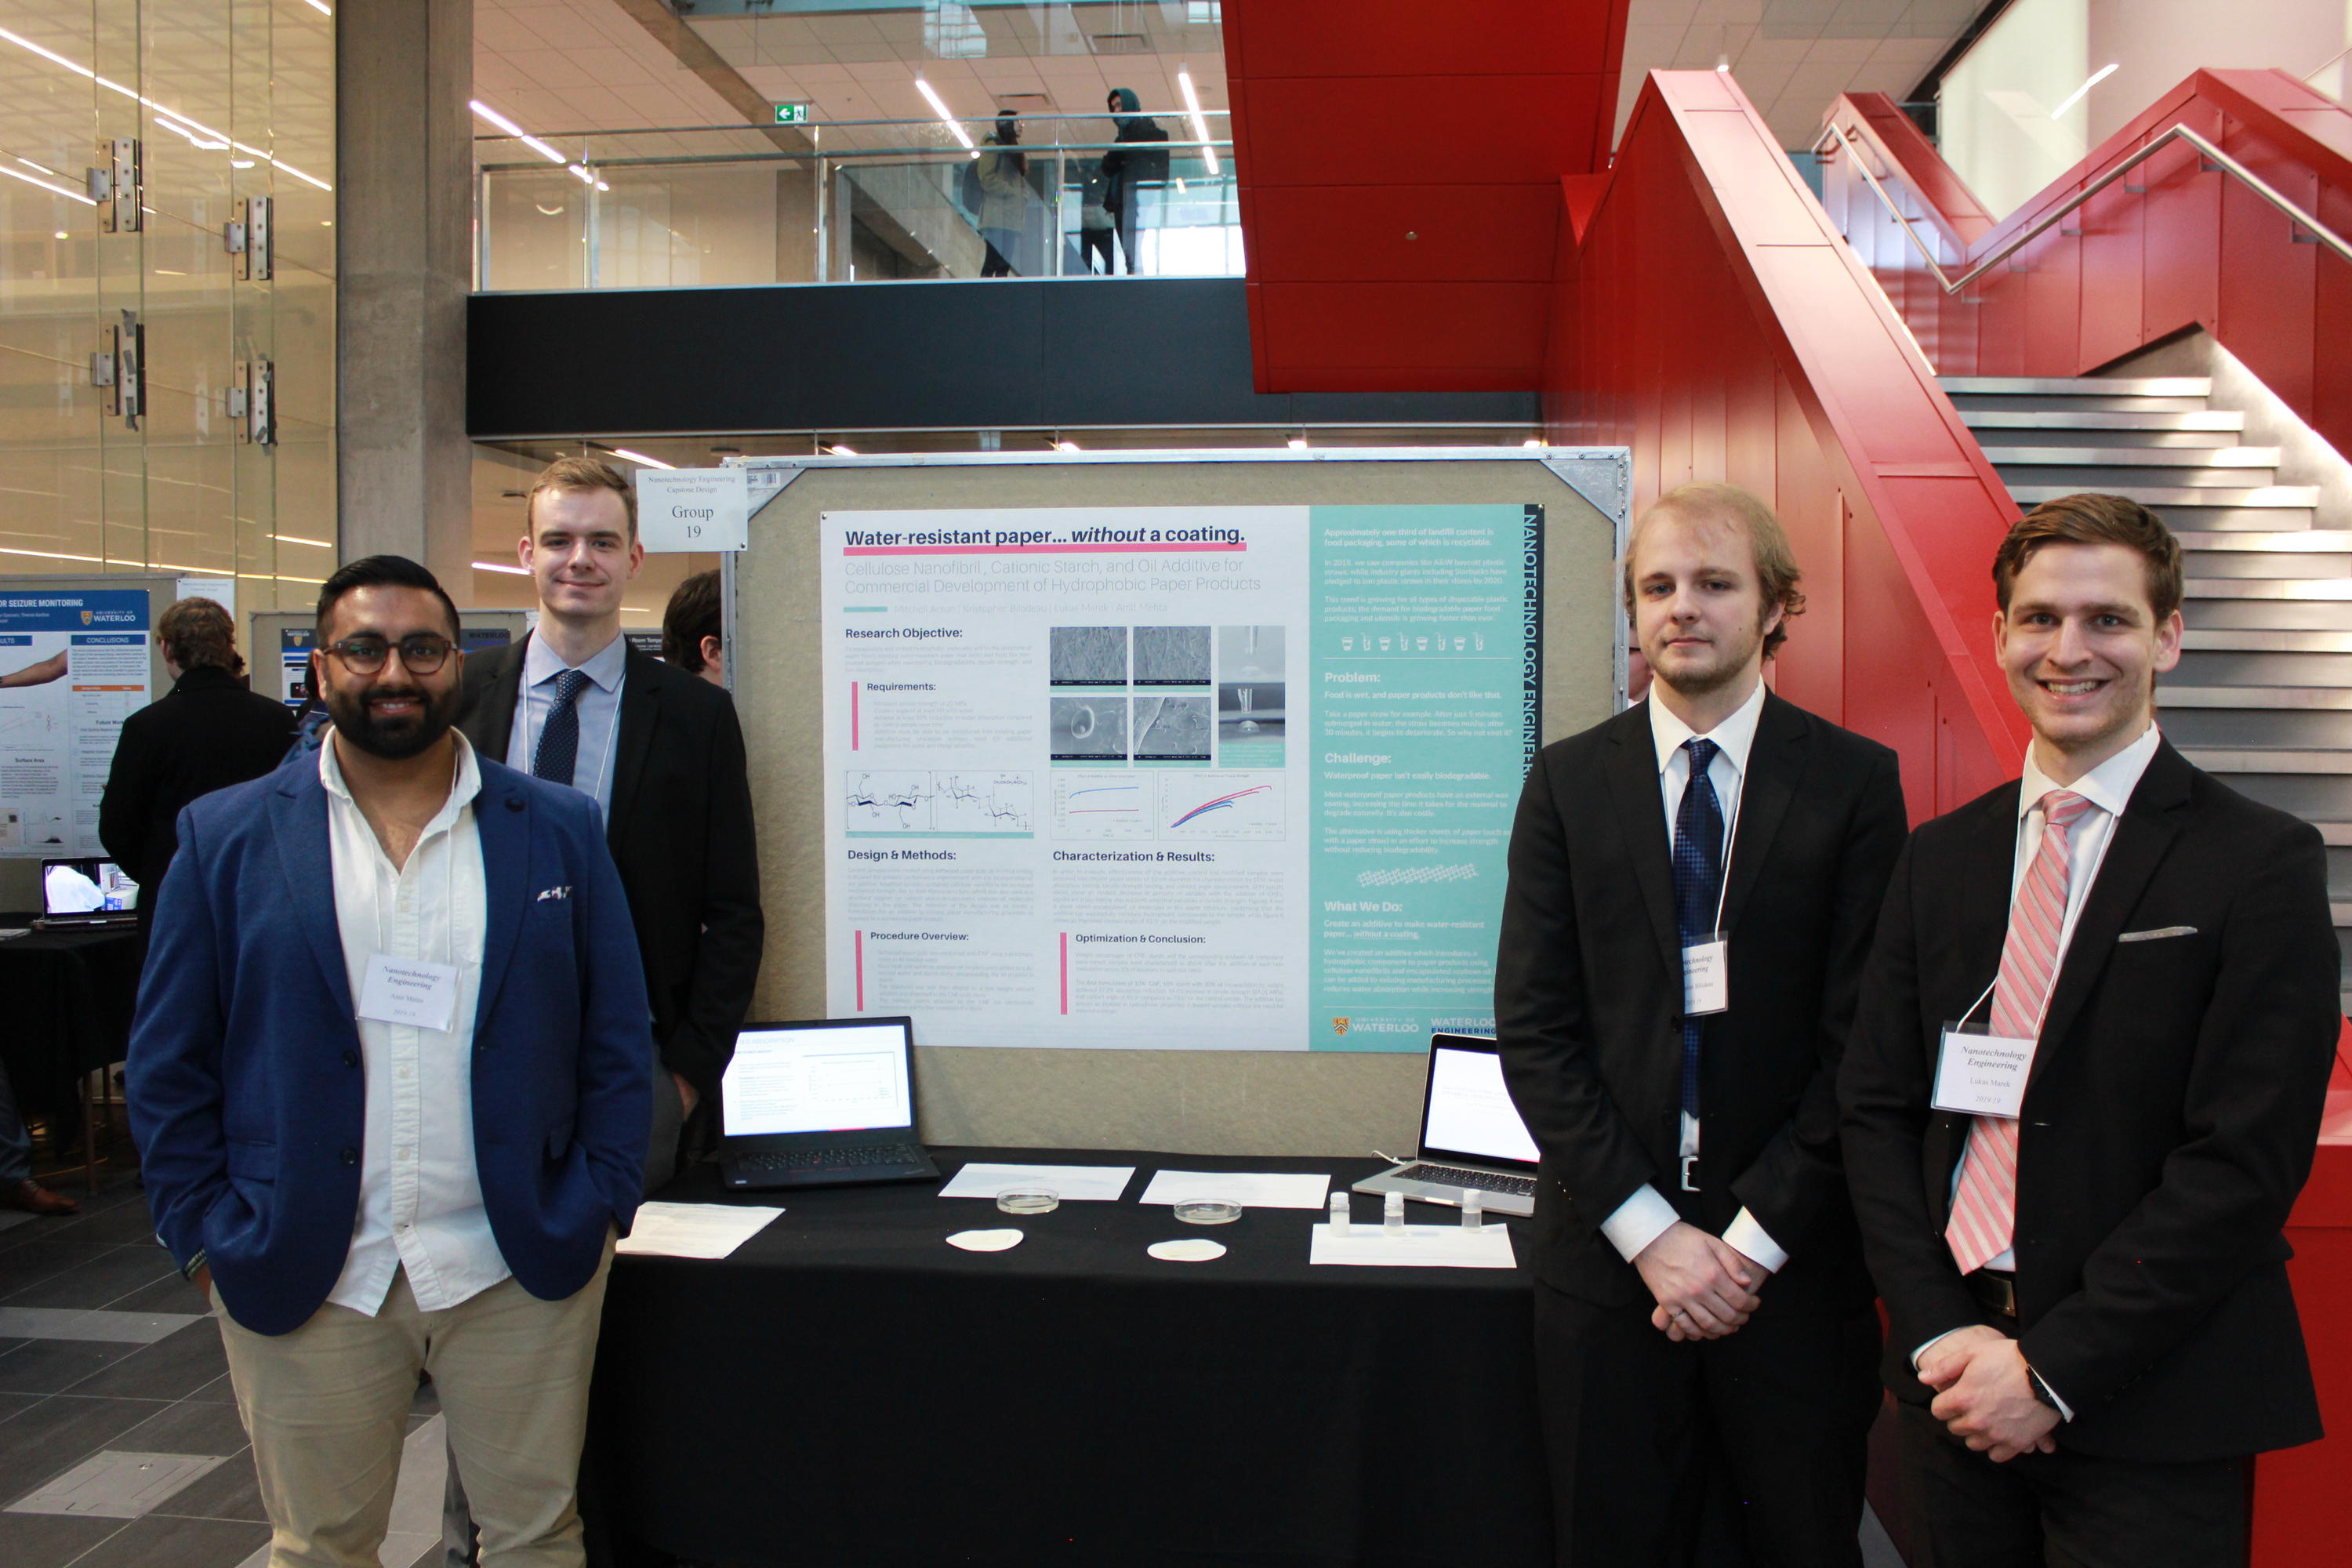 Team 19 students with their project poster at the 2019 Capstone Design Symposium.